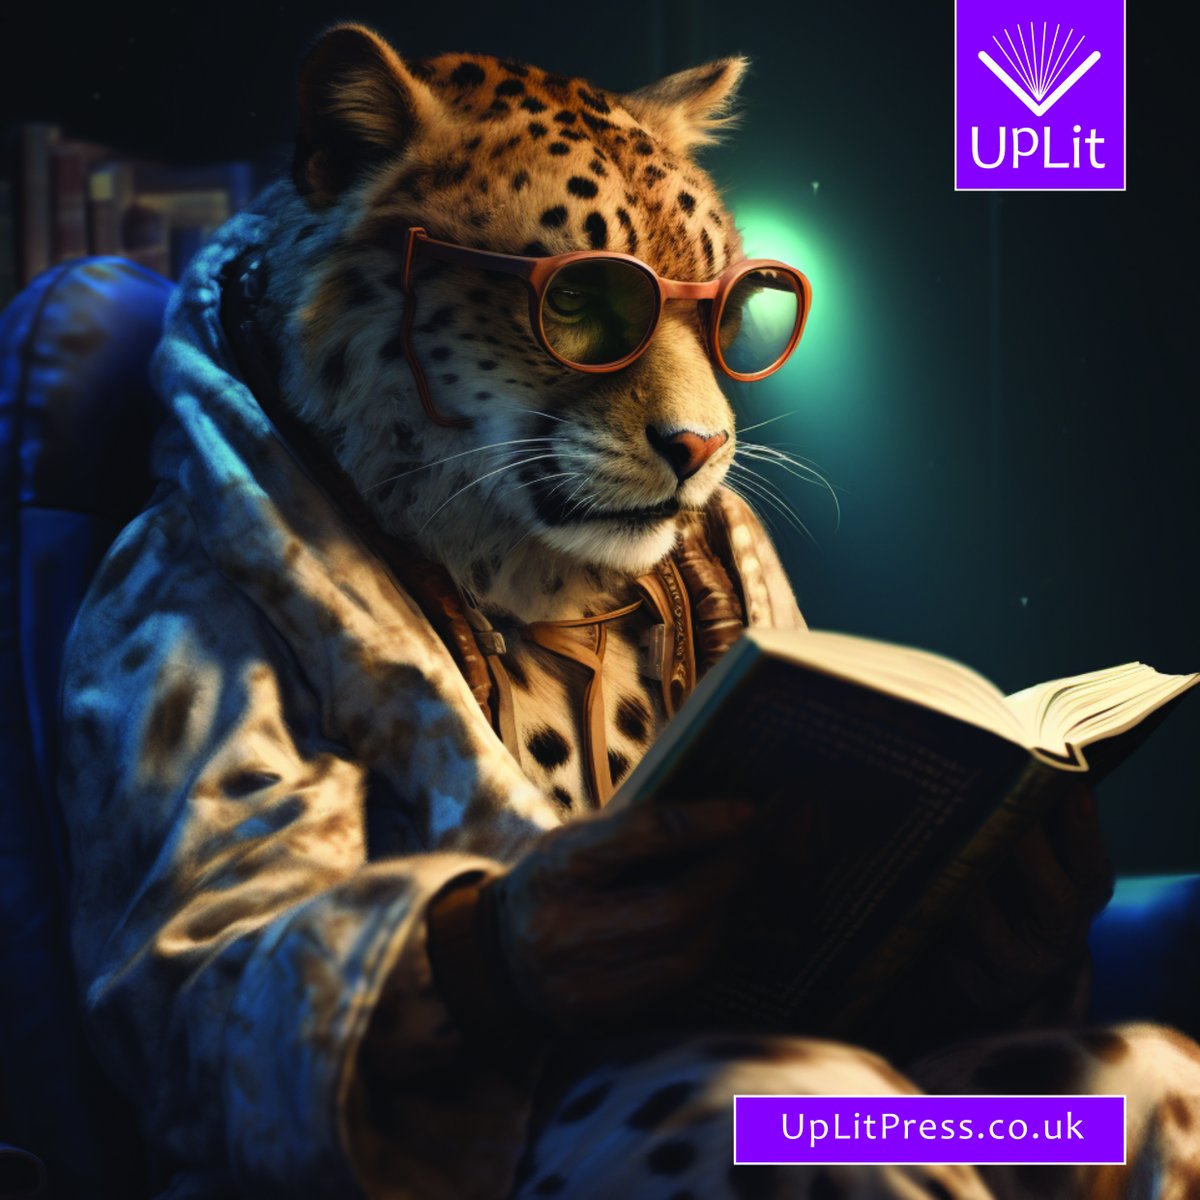 What's the puuurfect book for your inner big cat to curl up with?
Let us know in the comments 👇

#amreading #amreadingya #booksofinstagram #booknerd #booklover #bookish #bookphotography #loverofbooks #bookcommunity #books #bibliophile #reading #bookshelf #bookobsessed